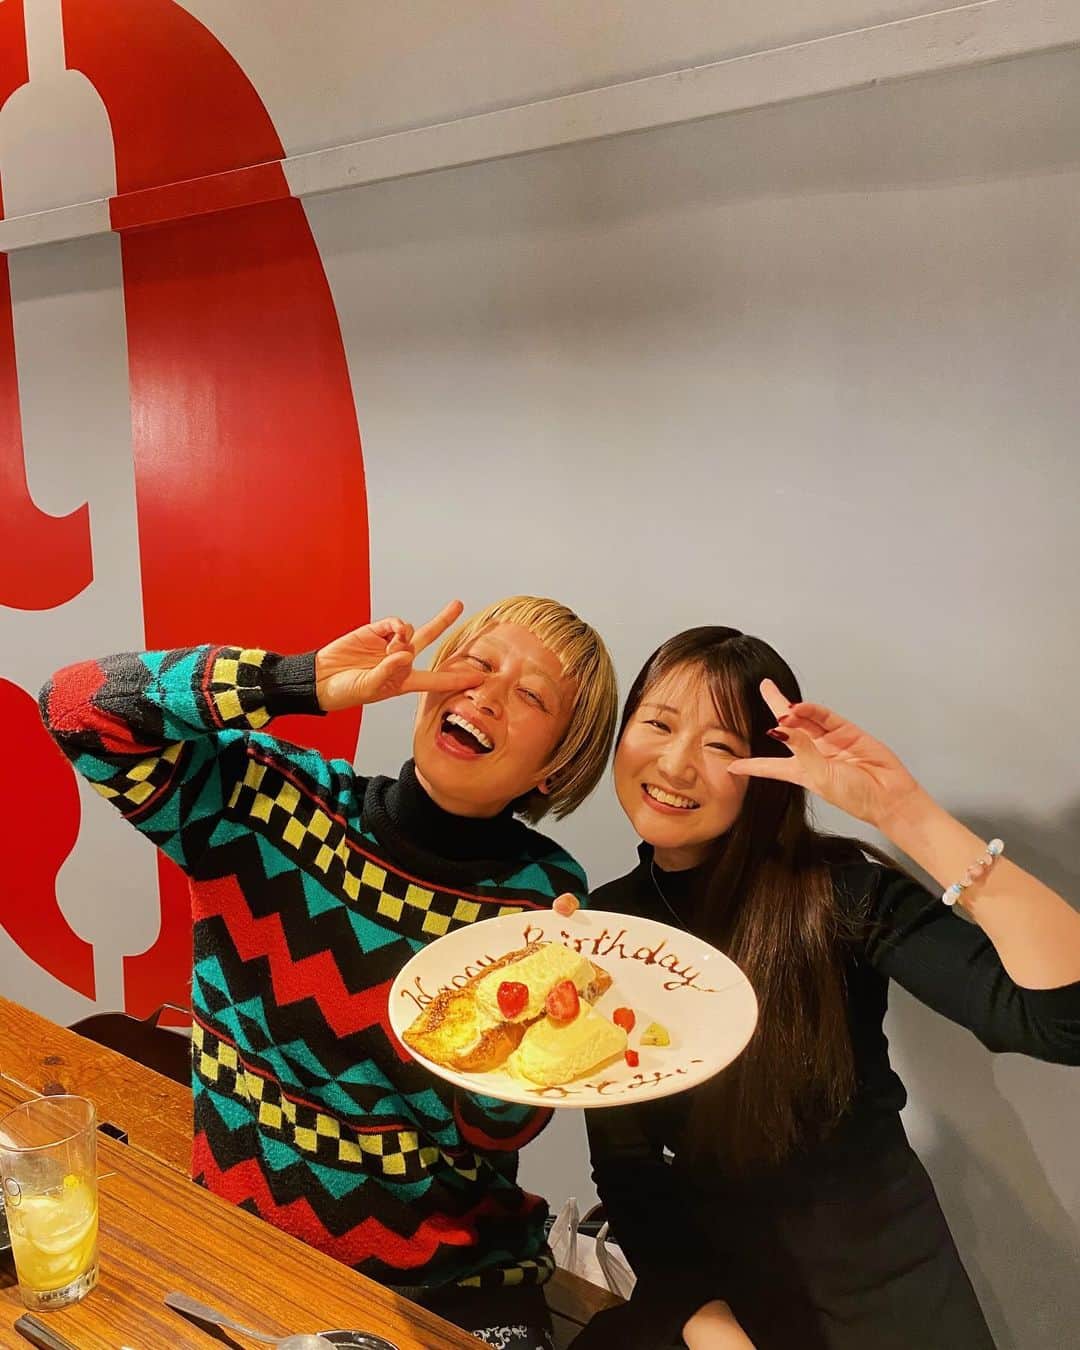 藤田早希さんのインスタグラム写真 - (藤田早希Instagram)「行きたかったお店とひとみぃの 遅めの誕生日を祝ったよ🧏🏻‍♀️ お肉全部美味しかったしまじで忘れとったけど この人大食いだったわ。 急速にご飯大盛りが消えていたよ。 サプライズプレート出して頂きました🥰 こうやってハッピーなバイブスはみんなで シェアしたいね✨ 昨日は無限ハッシュタグ覗きしていたよ🤭 改めて誕生日おめでとうー！ これからもいっぱい笑おうねー！. . ☆☆☆☆☆☆☆☆☆☆☆☆☆☆☆☆☆☆☆☆☆☆☆. .  The store I wanted to go to and Hitomi's I celebrated a late birthday🧏🏻‍♀️ All the meat was so delicious I forgot about it. This person was a big eater. The large bowl of rice was quickly disappearing. I was given a surprise plate 🥰 This is how we all share happy vibes I want to share it ✨ Yesterday I was peeking into the infinite hashtag 🤭 Happy birthday again! .  가고 싶은 가게와 히토미 늦은 생일을 축하했어 🧏🏻‍♀️ 고기 모두 맛있었습니다. 잊어 버렸습니다. 이 사람 대식이었어. 급속히 밥 덩어리가 사라지고 있었어. 서프라이즈 플레이트를 받았습니다 🥰 이렇게 행복한 바이브스는 모두 공유하고 싶습니다 ✨ 어제는 무한 해시 태그 들여다 봤어 🤭 다시 생일 축하해!. . ☆☆☆☆☆☆☆☆☆☆☆☆☆☆☆☆☆☆☆☆☆☆☆. . . . #渋谷 #渋谷グルメ #焼肉 #ハッシュタグ覗き #29terrace #29terrace_shibuyaminamiguchi . . . .」10月10日 21時38分 - sakifujita